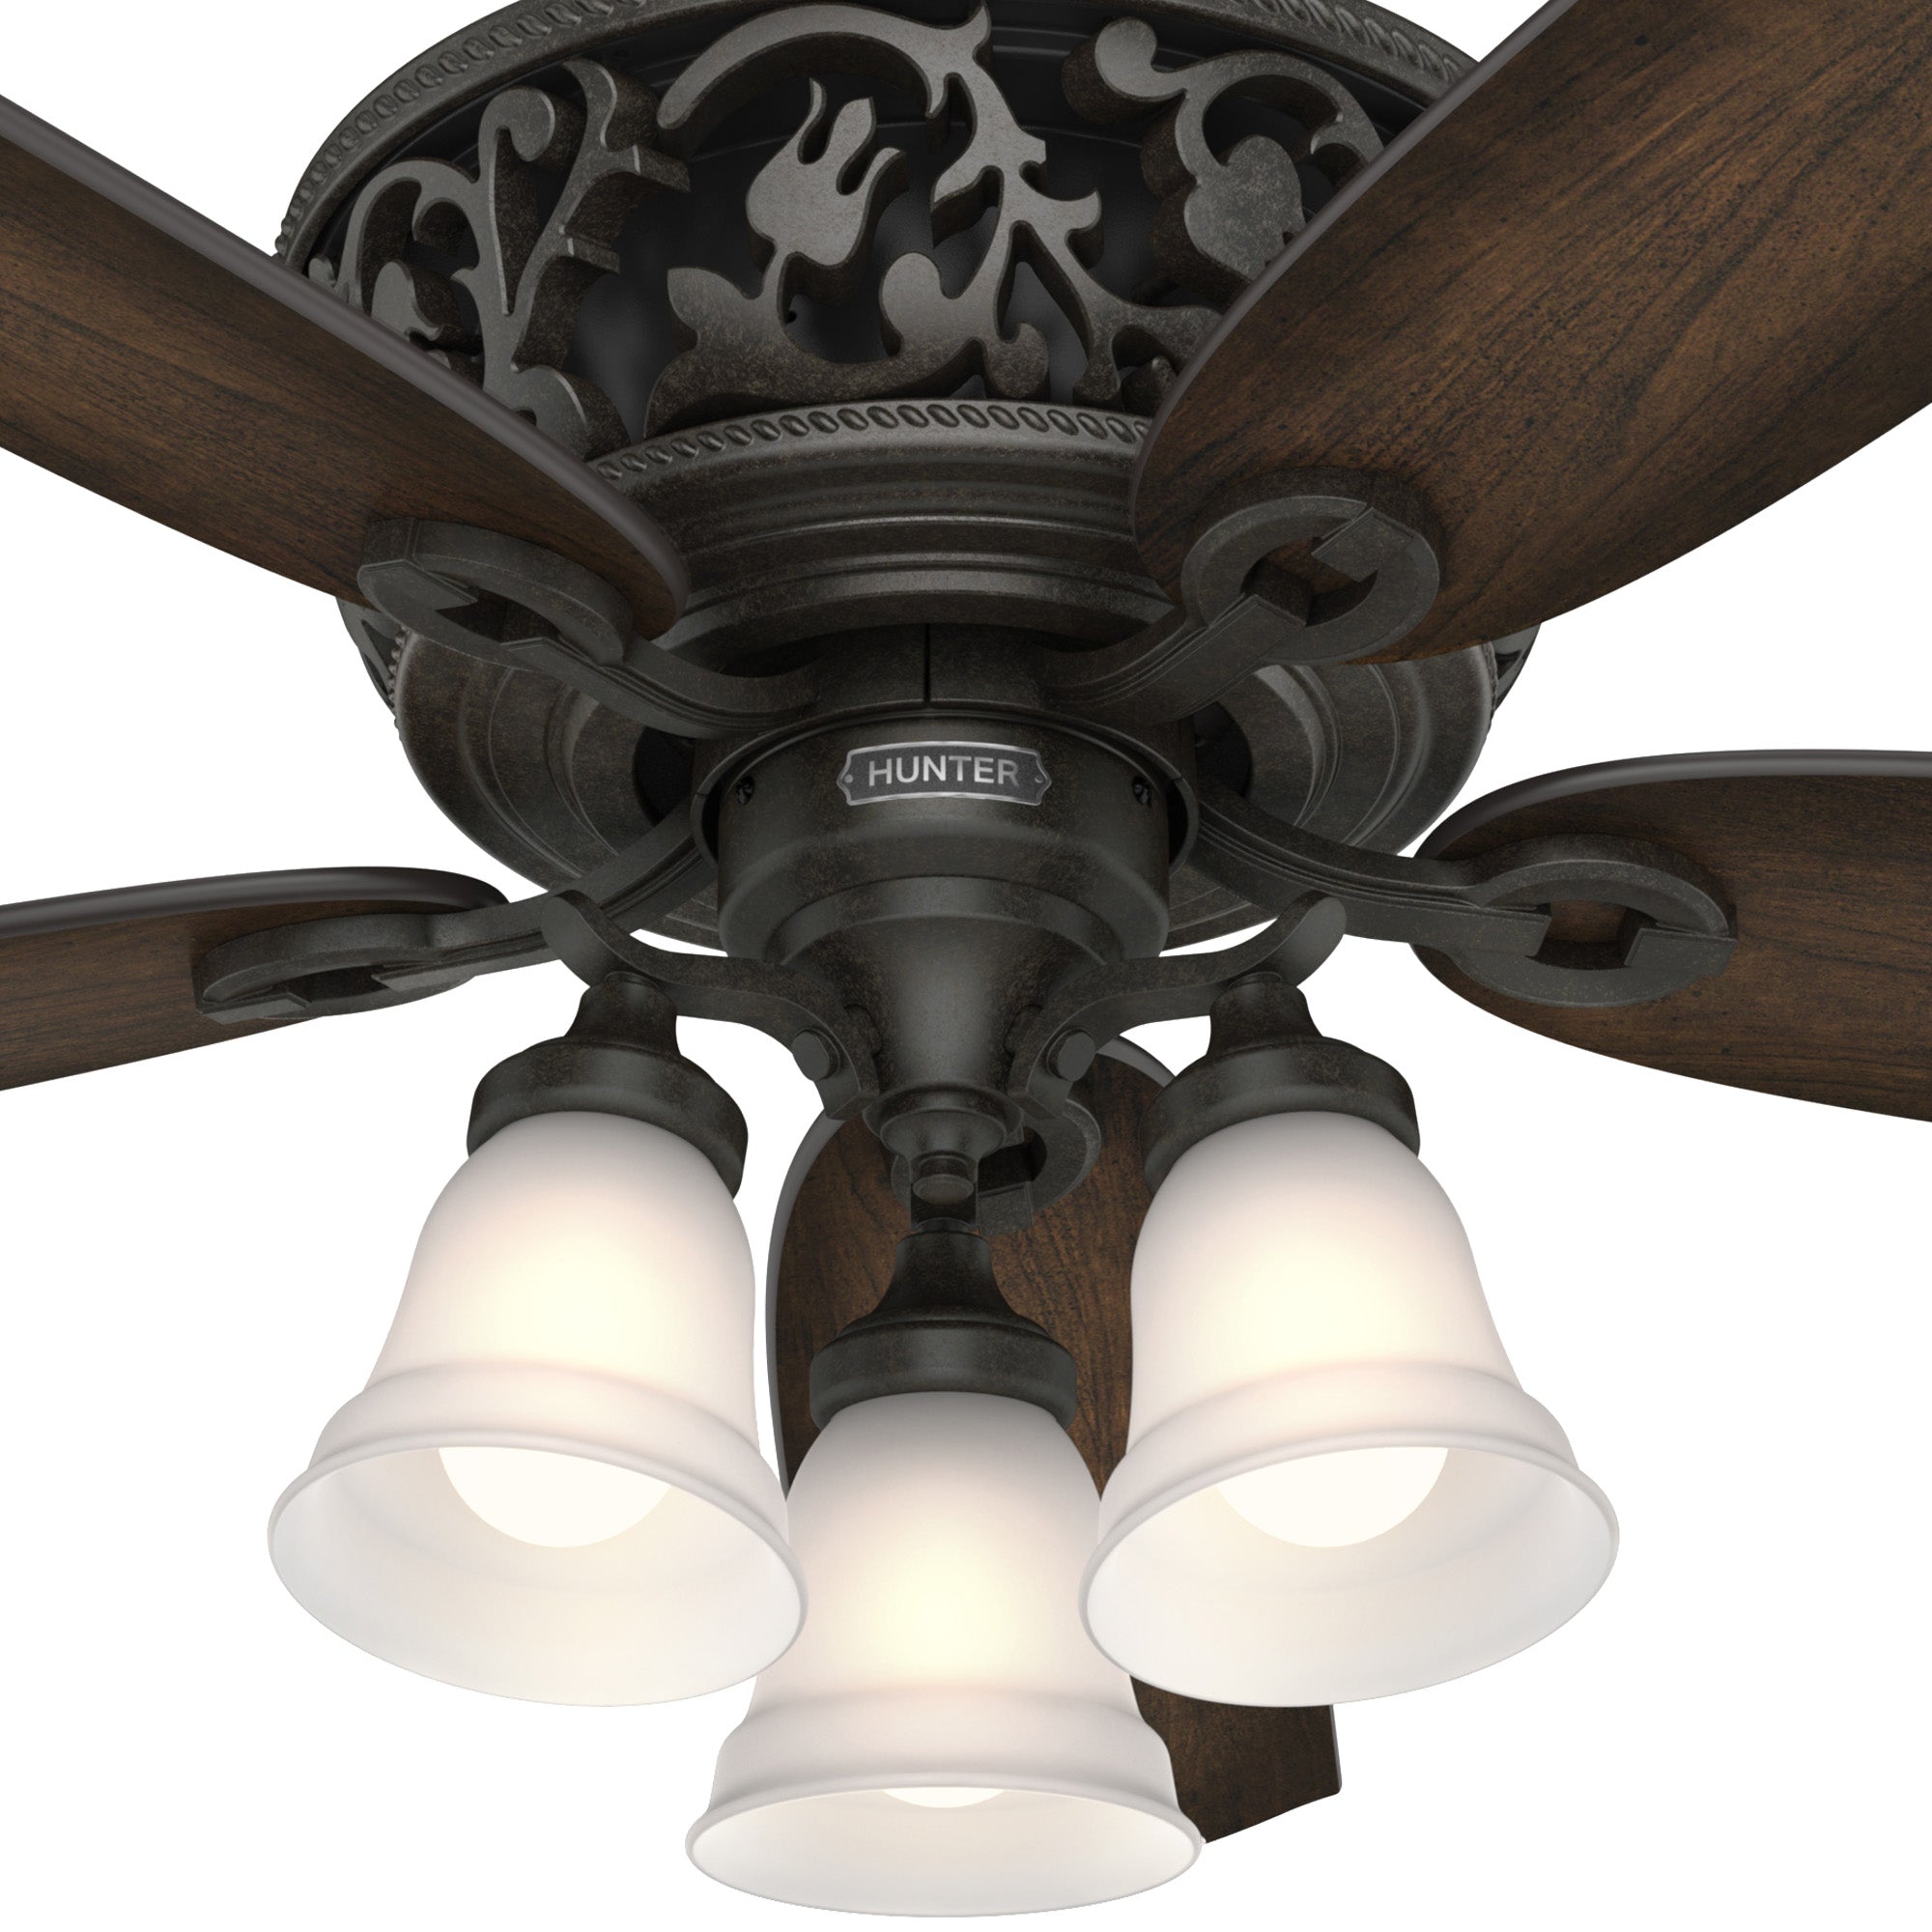 Hunter 54 inch Promenade Ceiling Fan with LED Light Kit and Handheld Remote